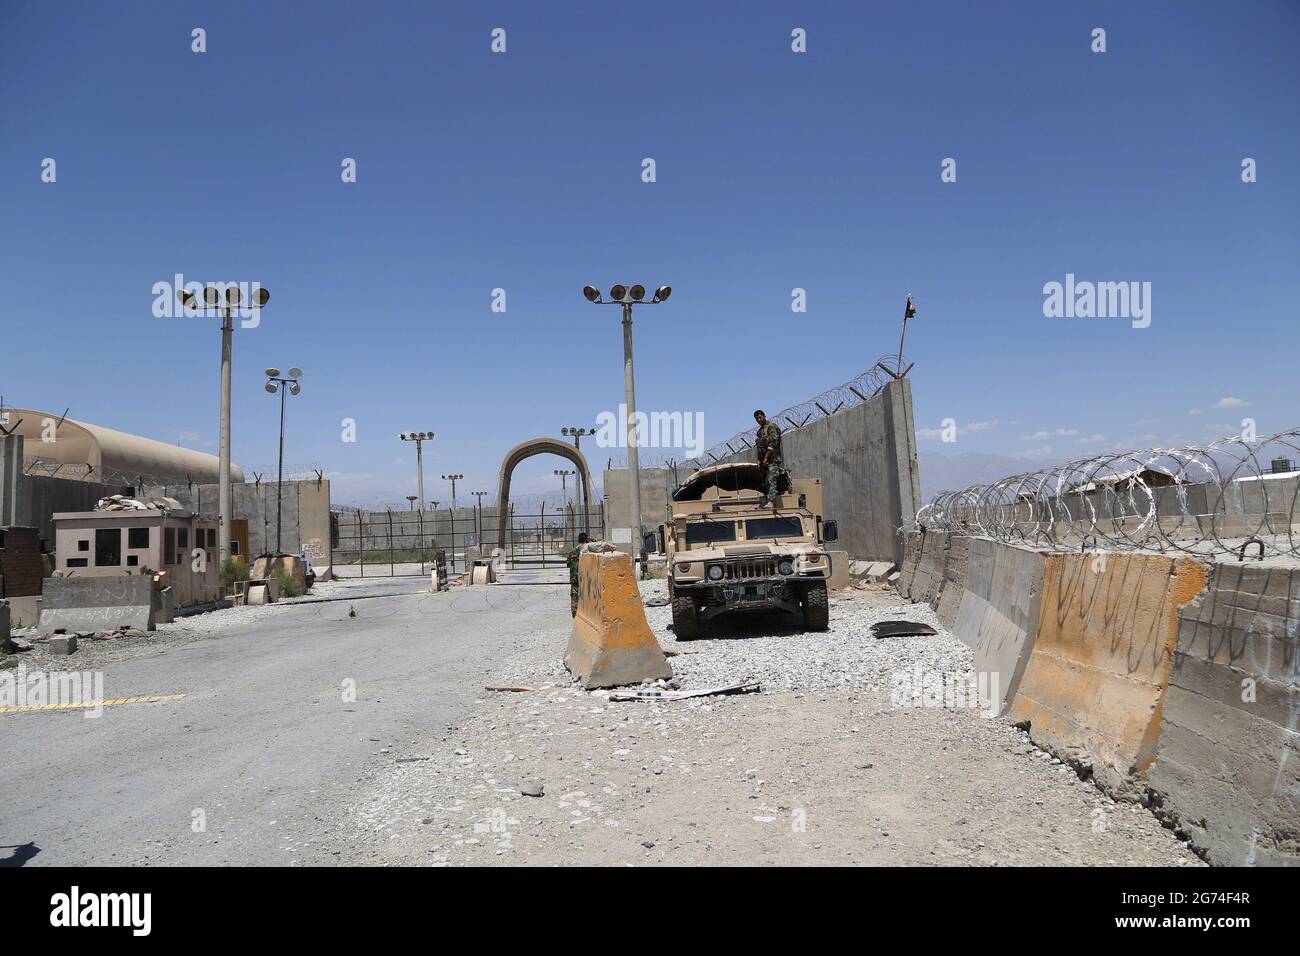 Bagram. 2nd July, 2021. Photo taken on July 2, 2021 shows the gate of Bagram Airfield after all U.S. and NATO forces evacuated in Parwan province, eastern Afghanistan. Credit: Sayed Mominzadah/Xinhua/Alamy Live News Stock Photo